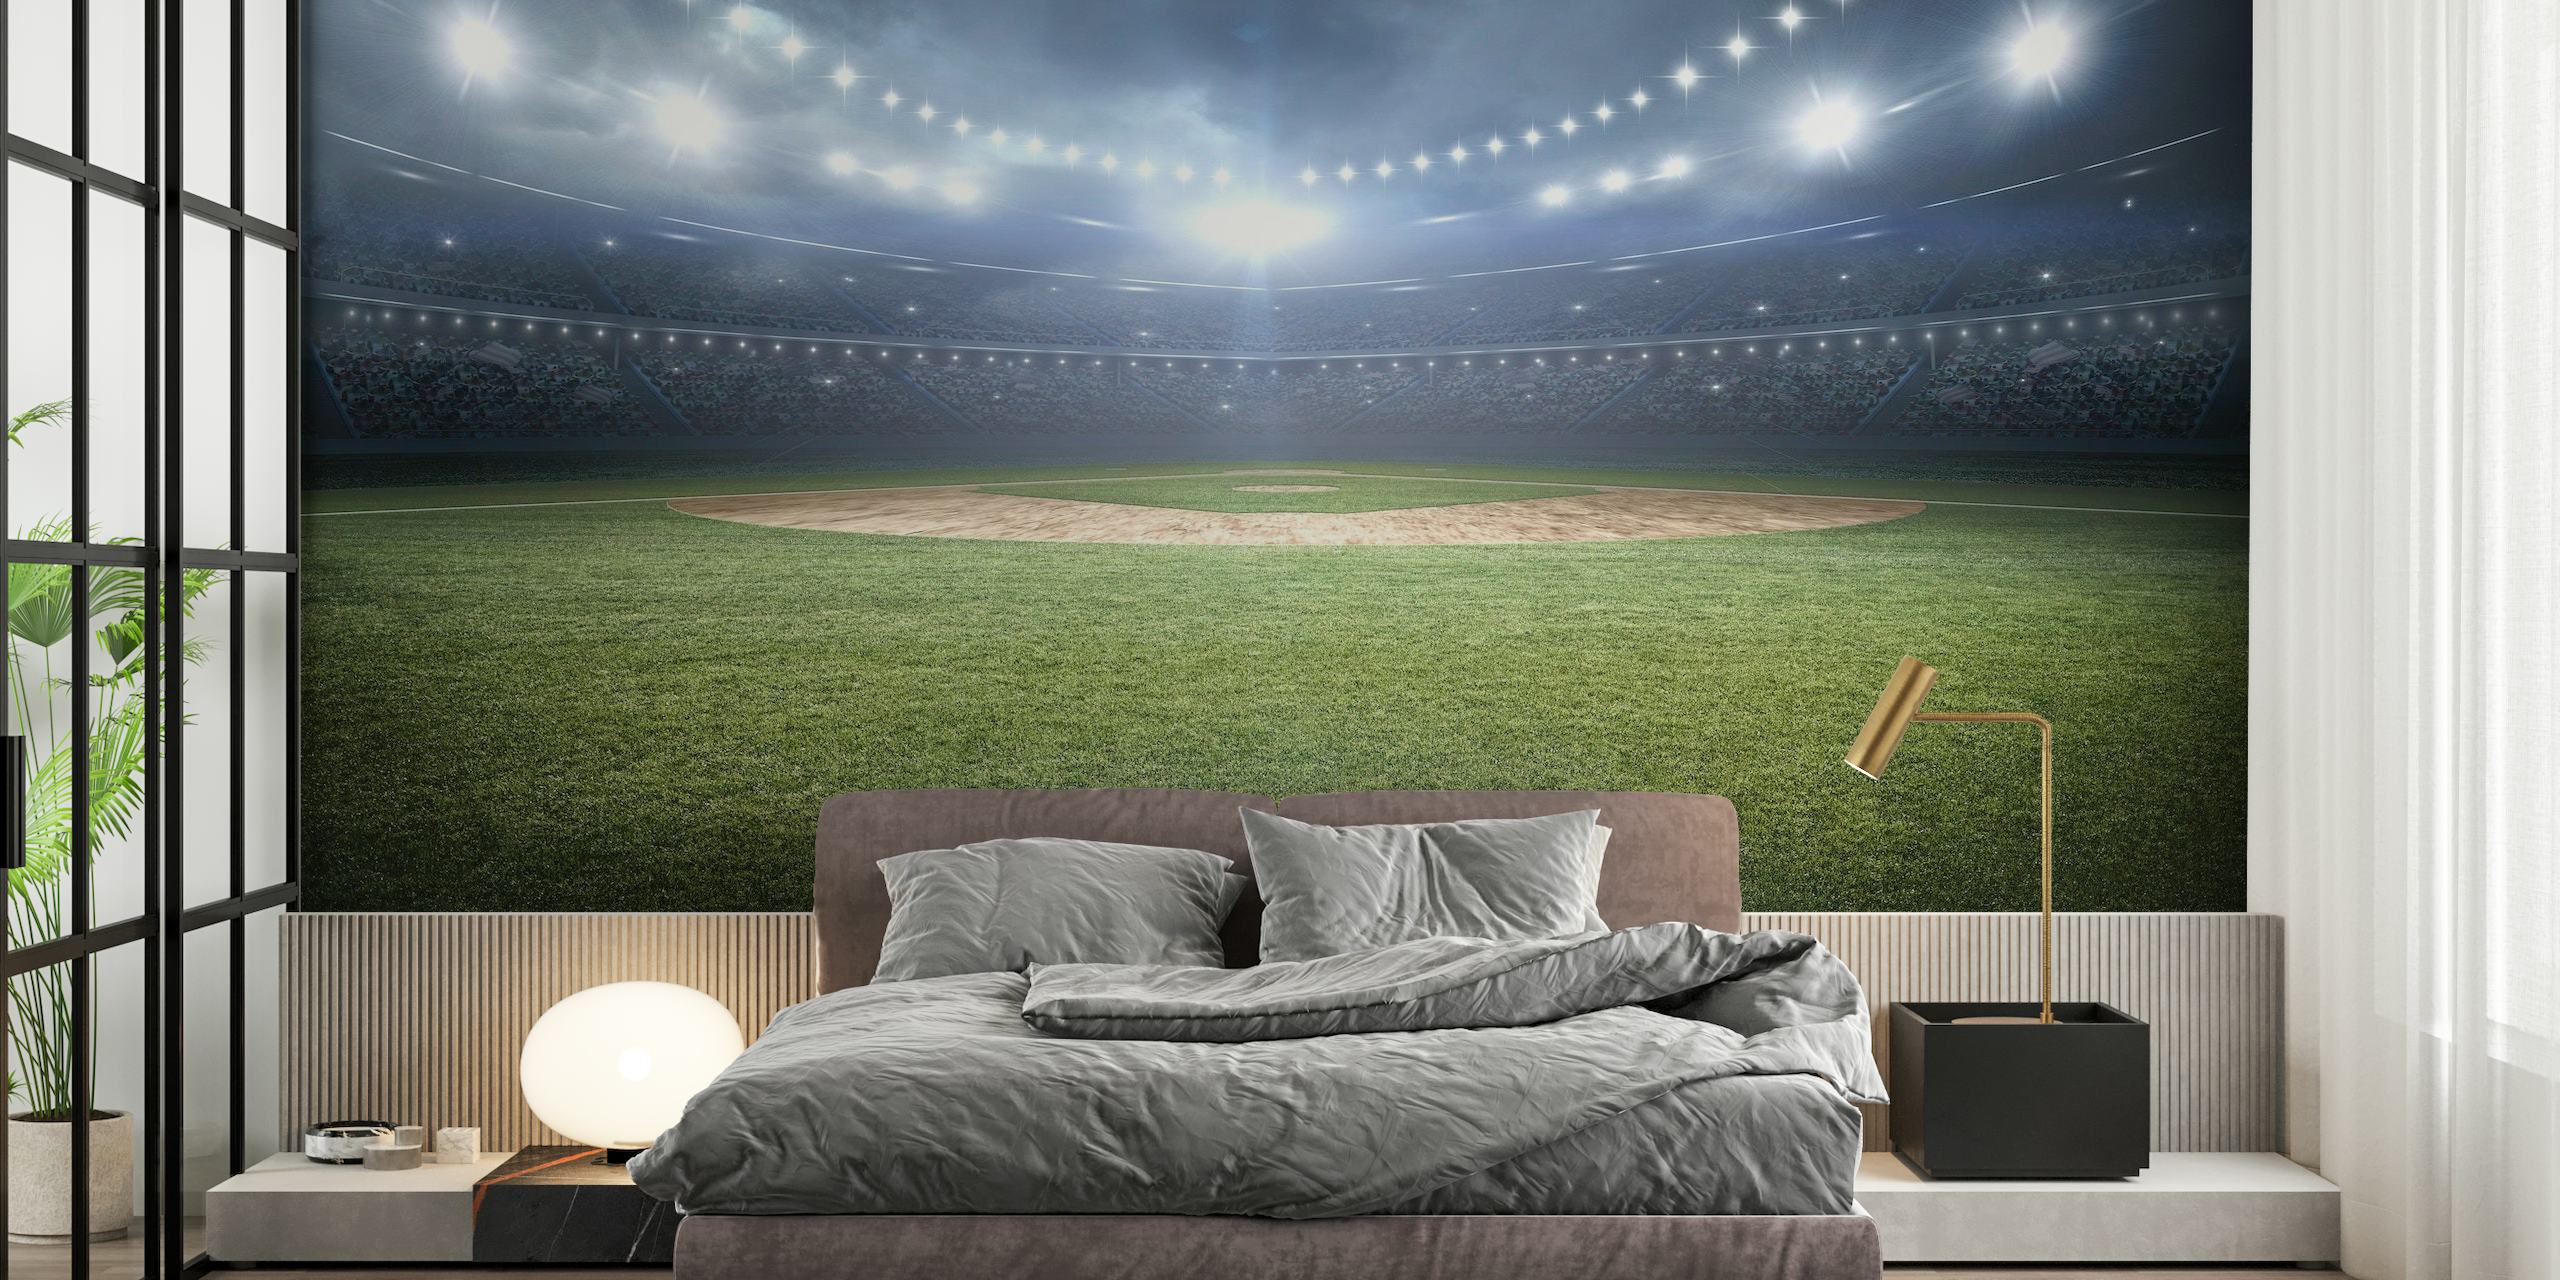 Panoramic wall mural of a baseball stadium at night with illuminated lights shining over the field